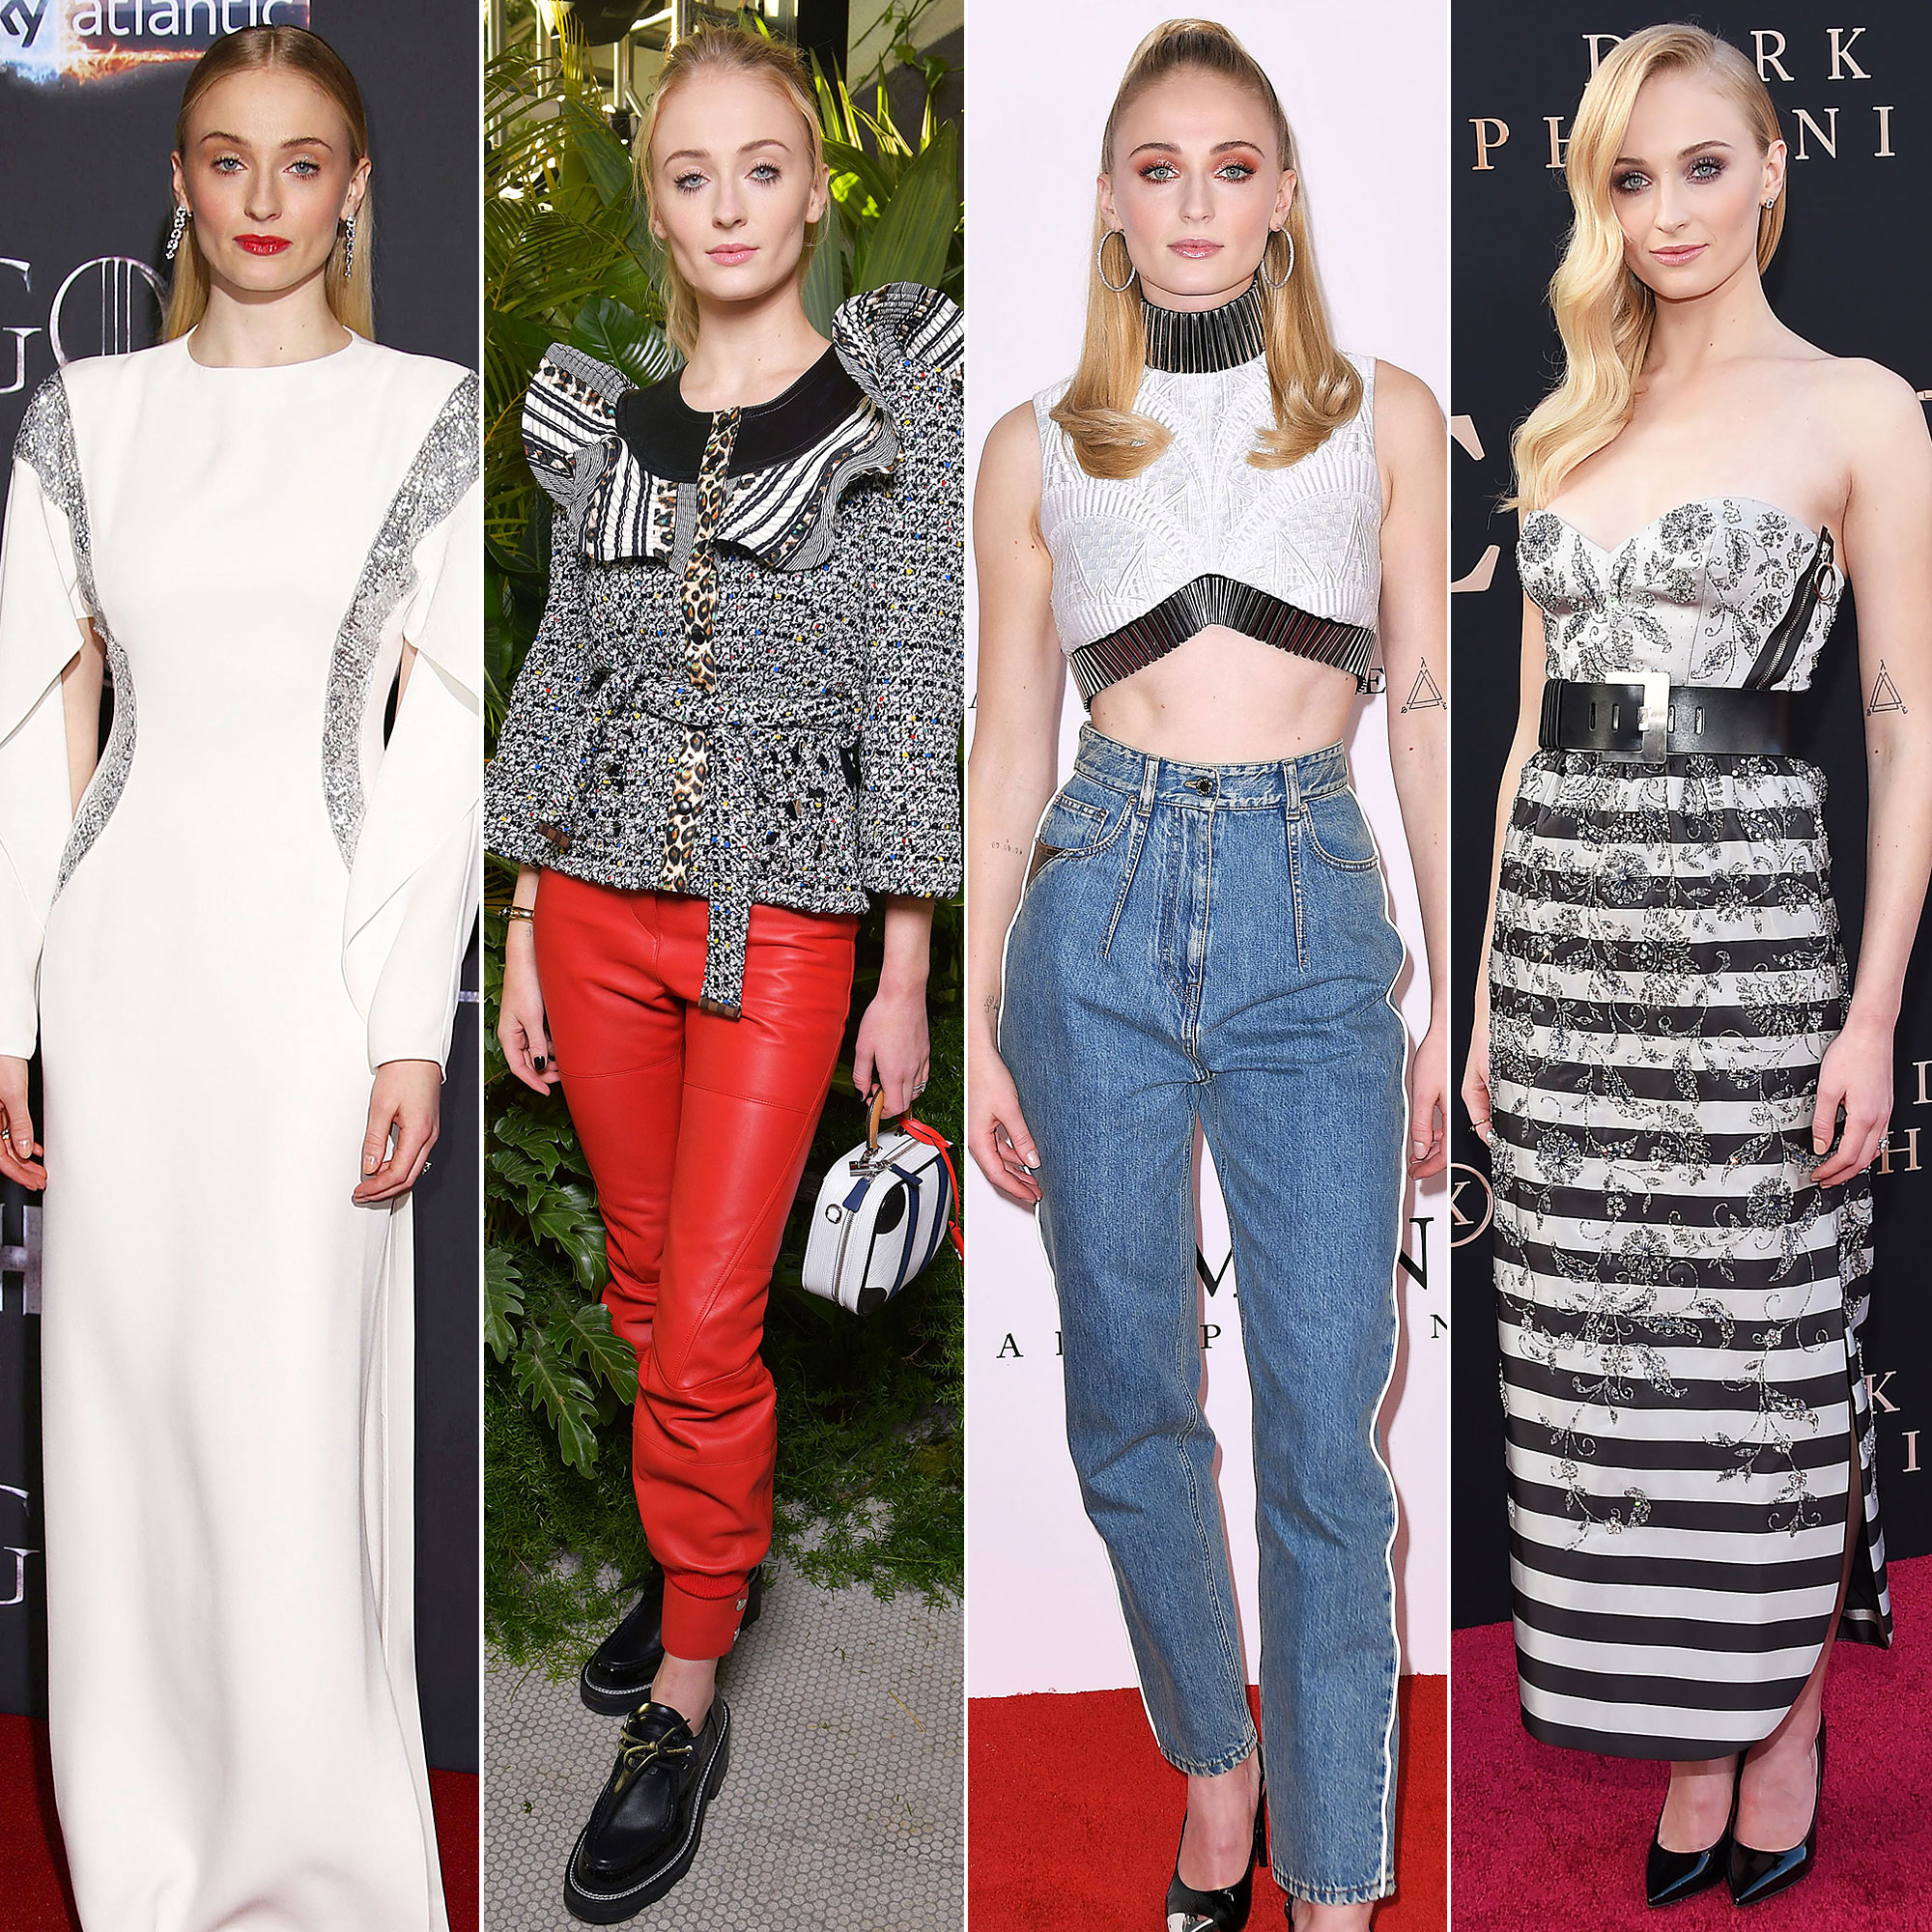 Sophie Turner in Louis Vuitton on the Red Carpet: Her Best Looks